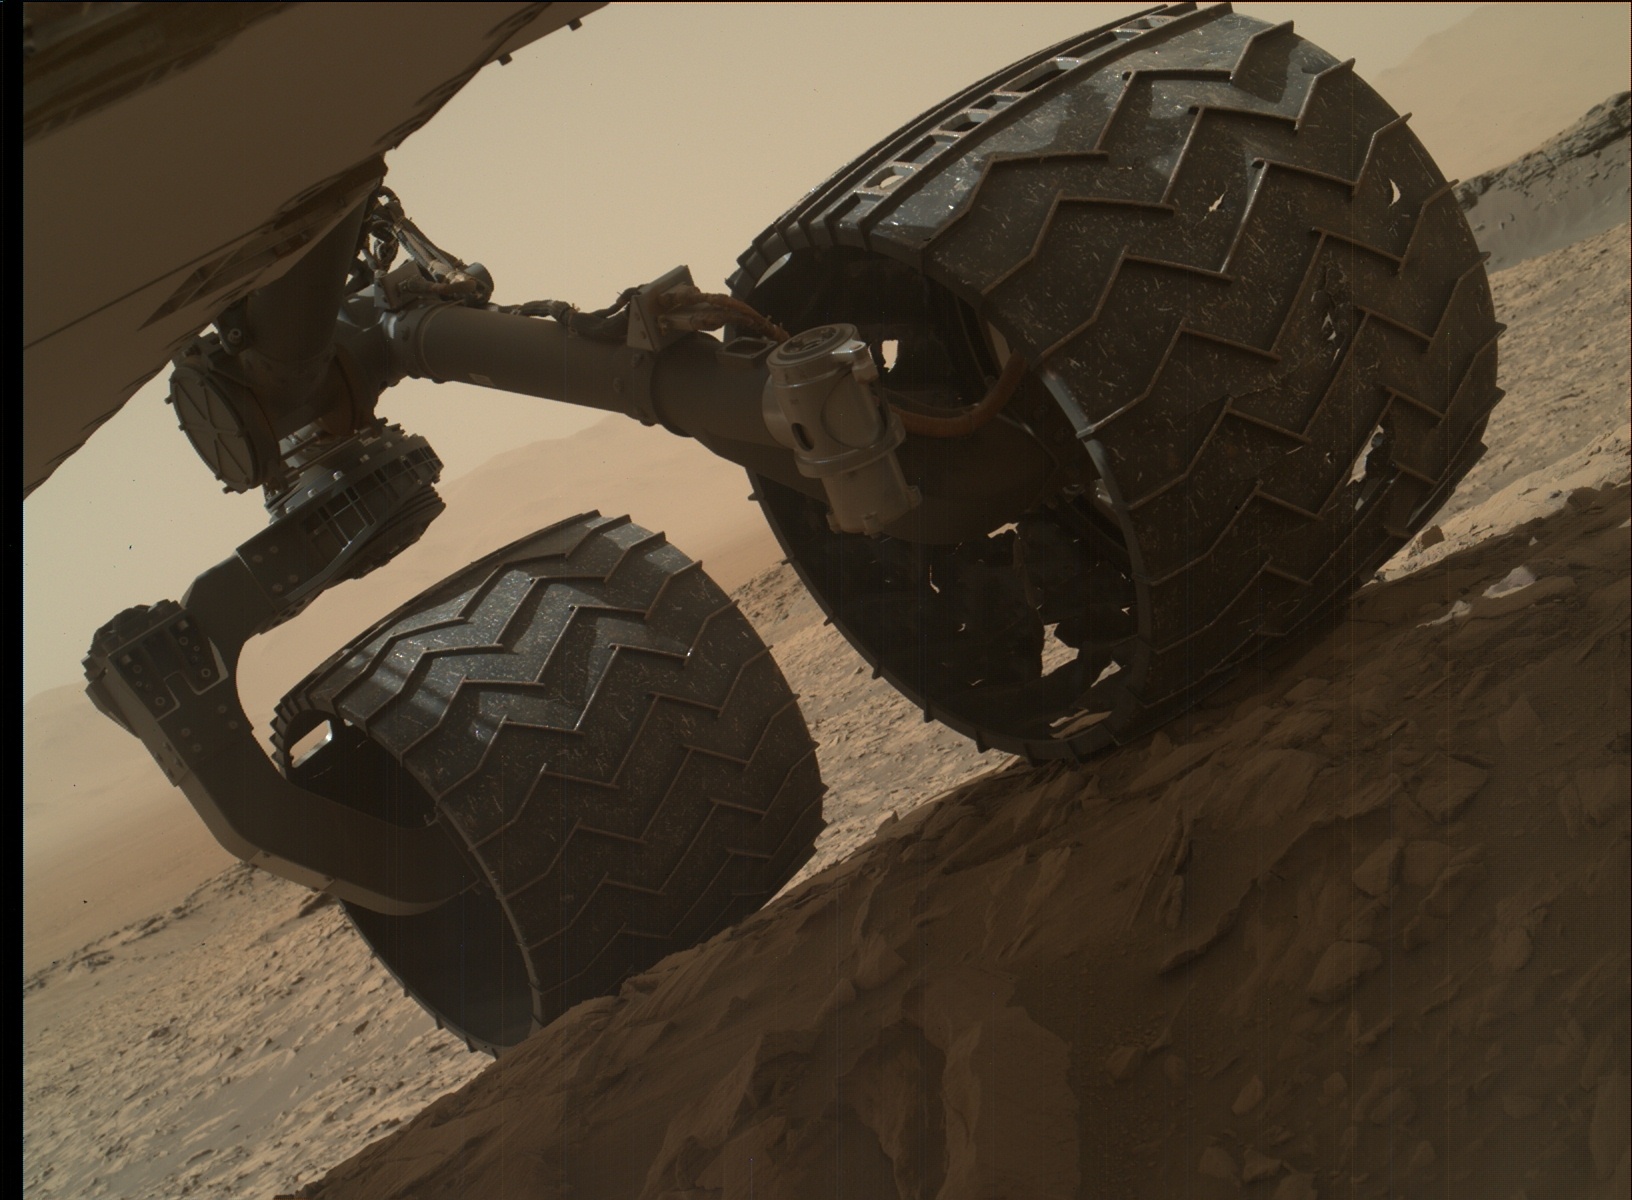 Nasa's Mars rover Curiosity acquired this image using its Mars Hand Lens Imager (MAHLI) on Sol 1386